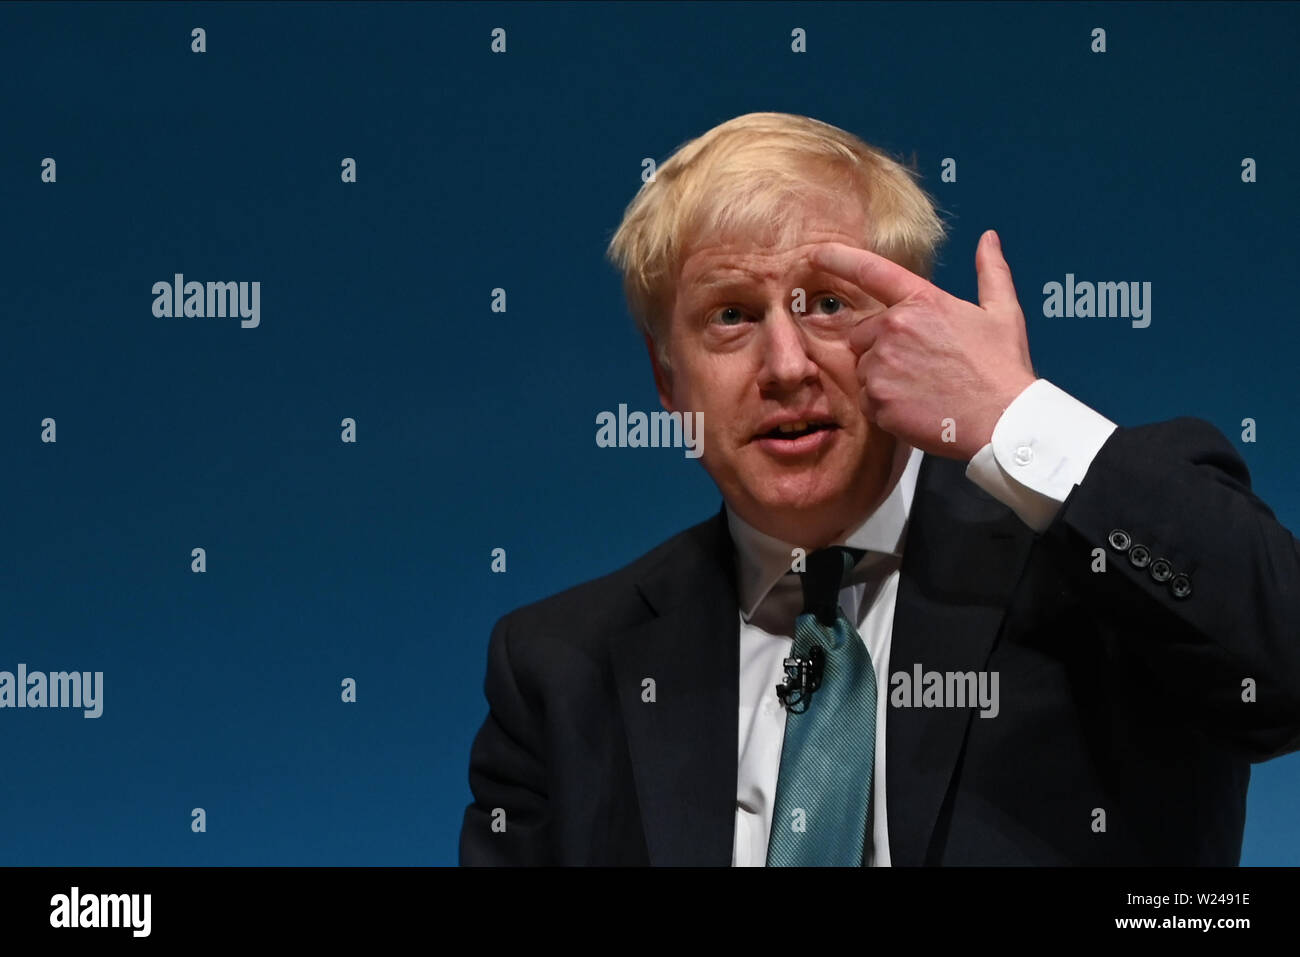 Perth, Scotland, United Kingdom, 05, July, 2019. Conservative Party leadership contender Boris Johnson addresses a leadership election hustings for party members. © Ken Jack / Alamy Live News Stock Photo